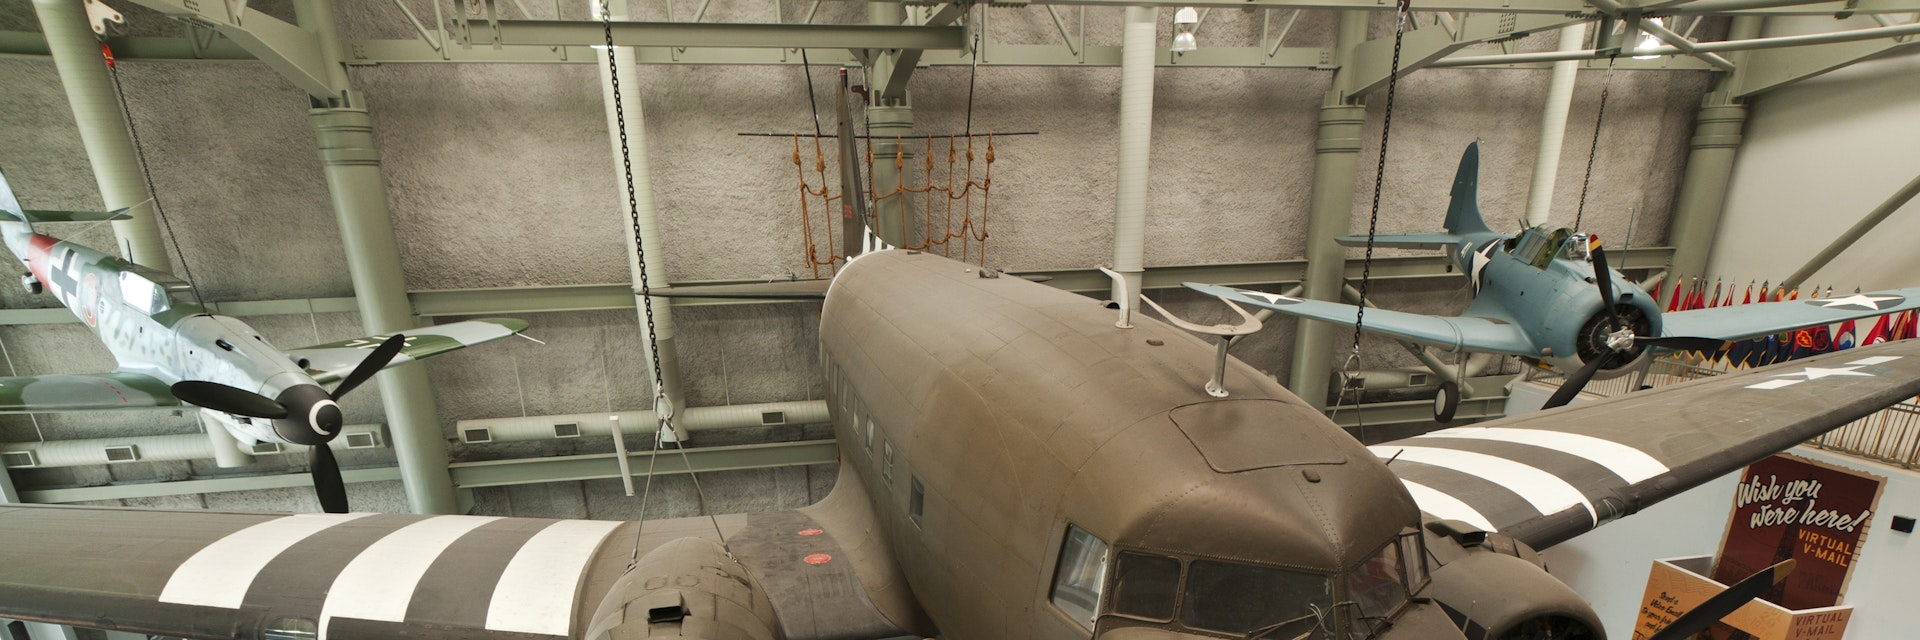 Douglas C-47 Dakota, transport glidertowning aircraft in D-Day markings at the National WWII Museum.